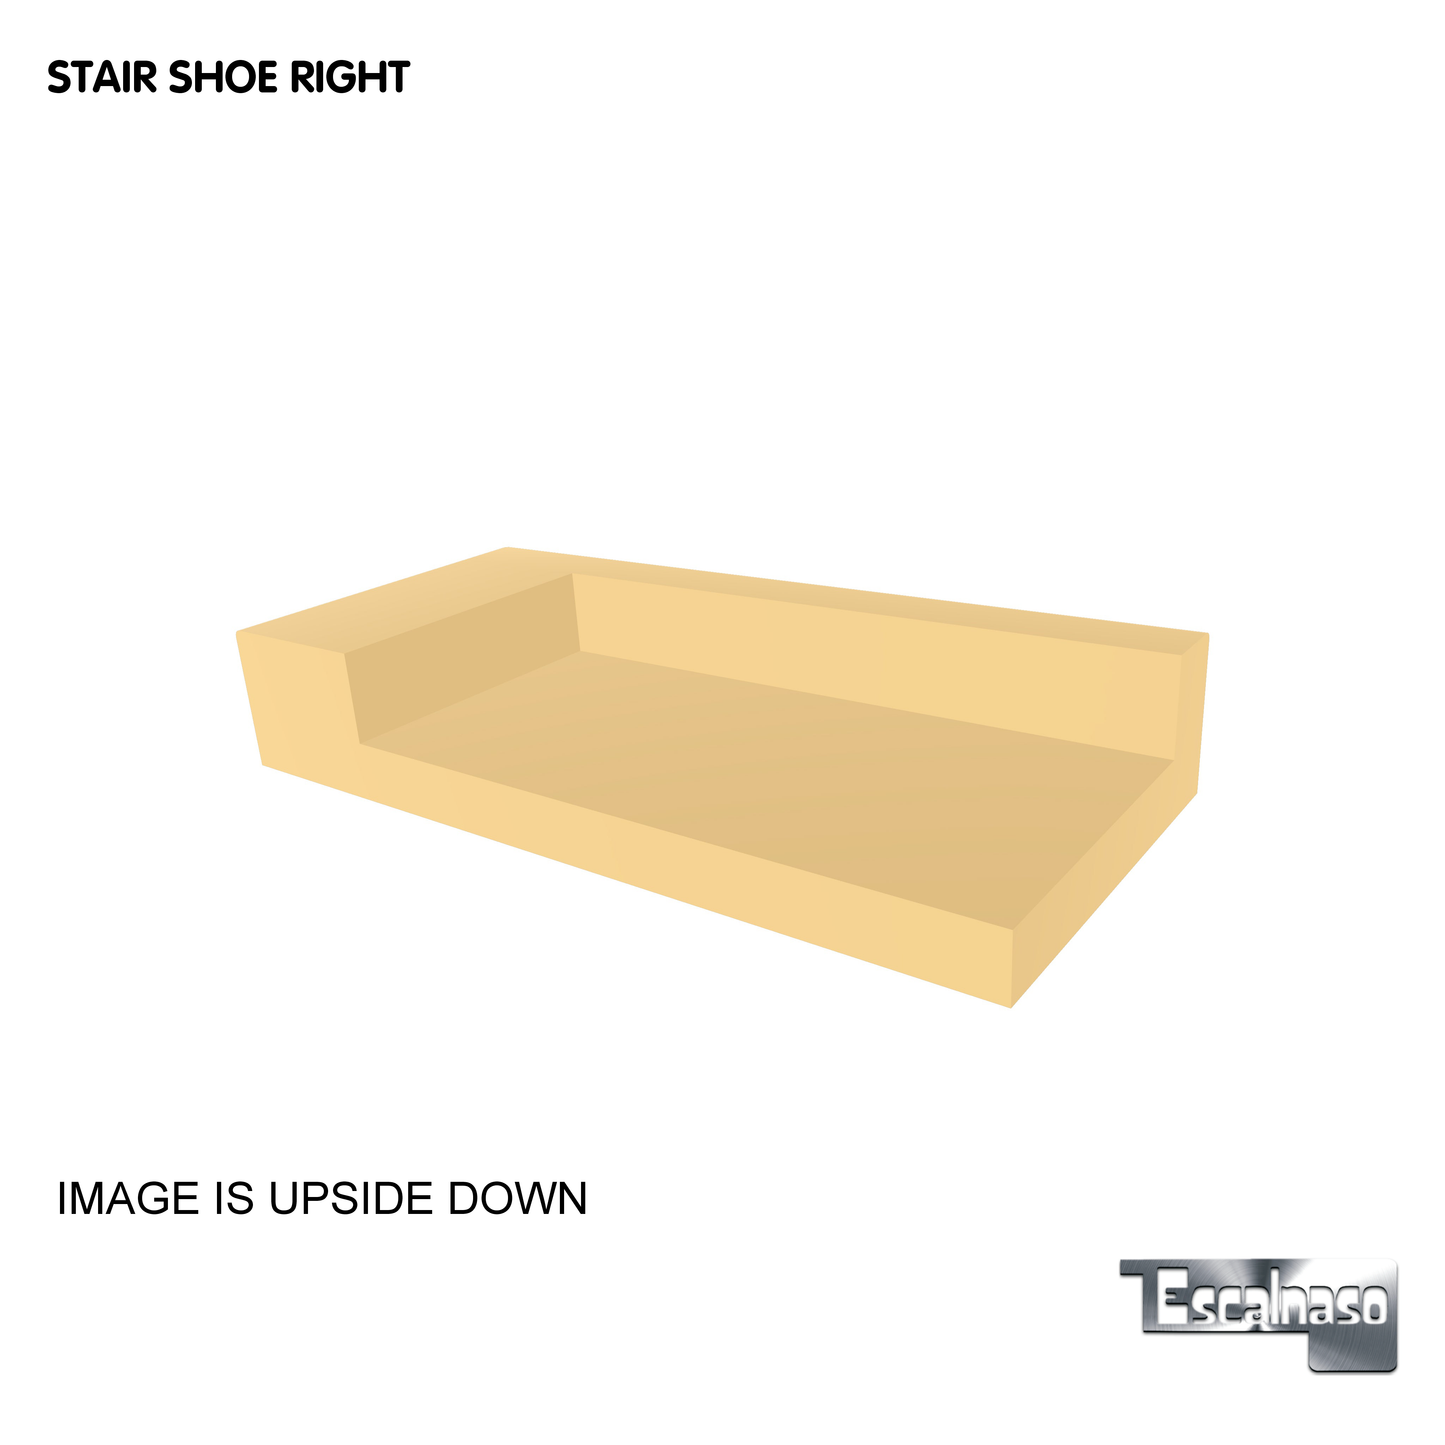 (18102) SMALL STAIR SHOE RIGHT